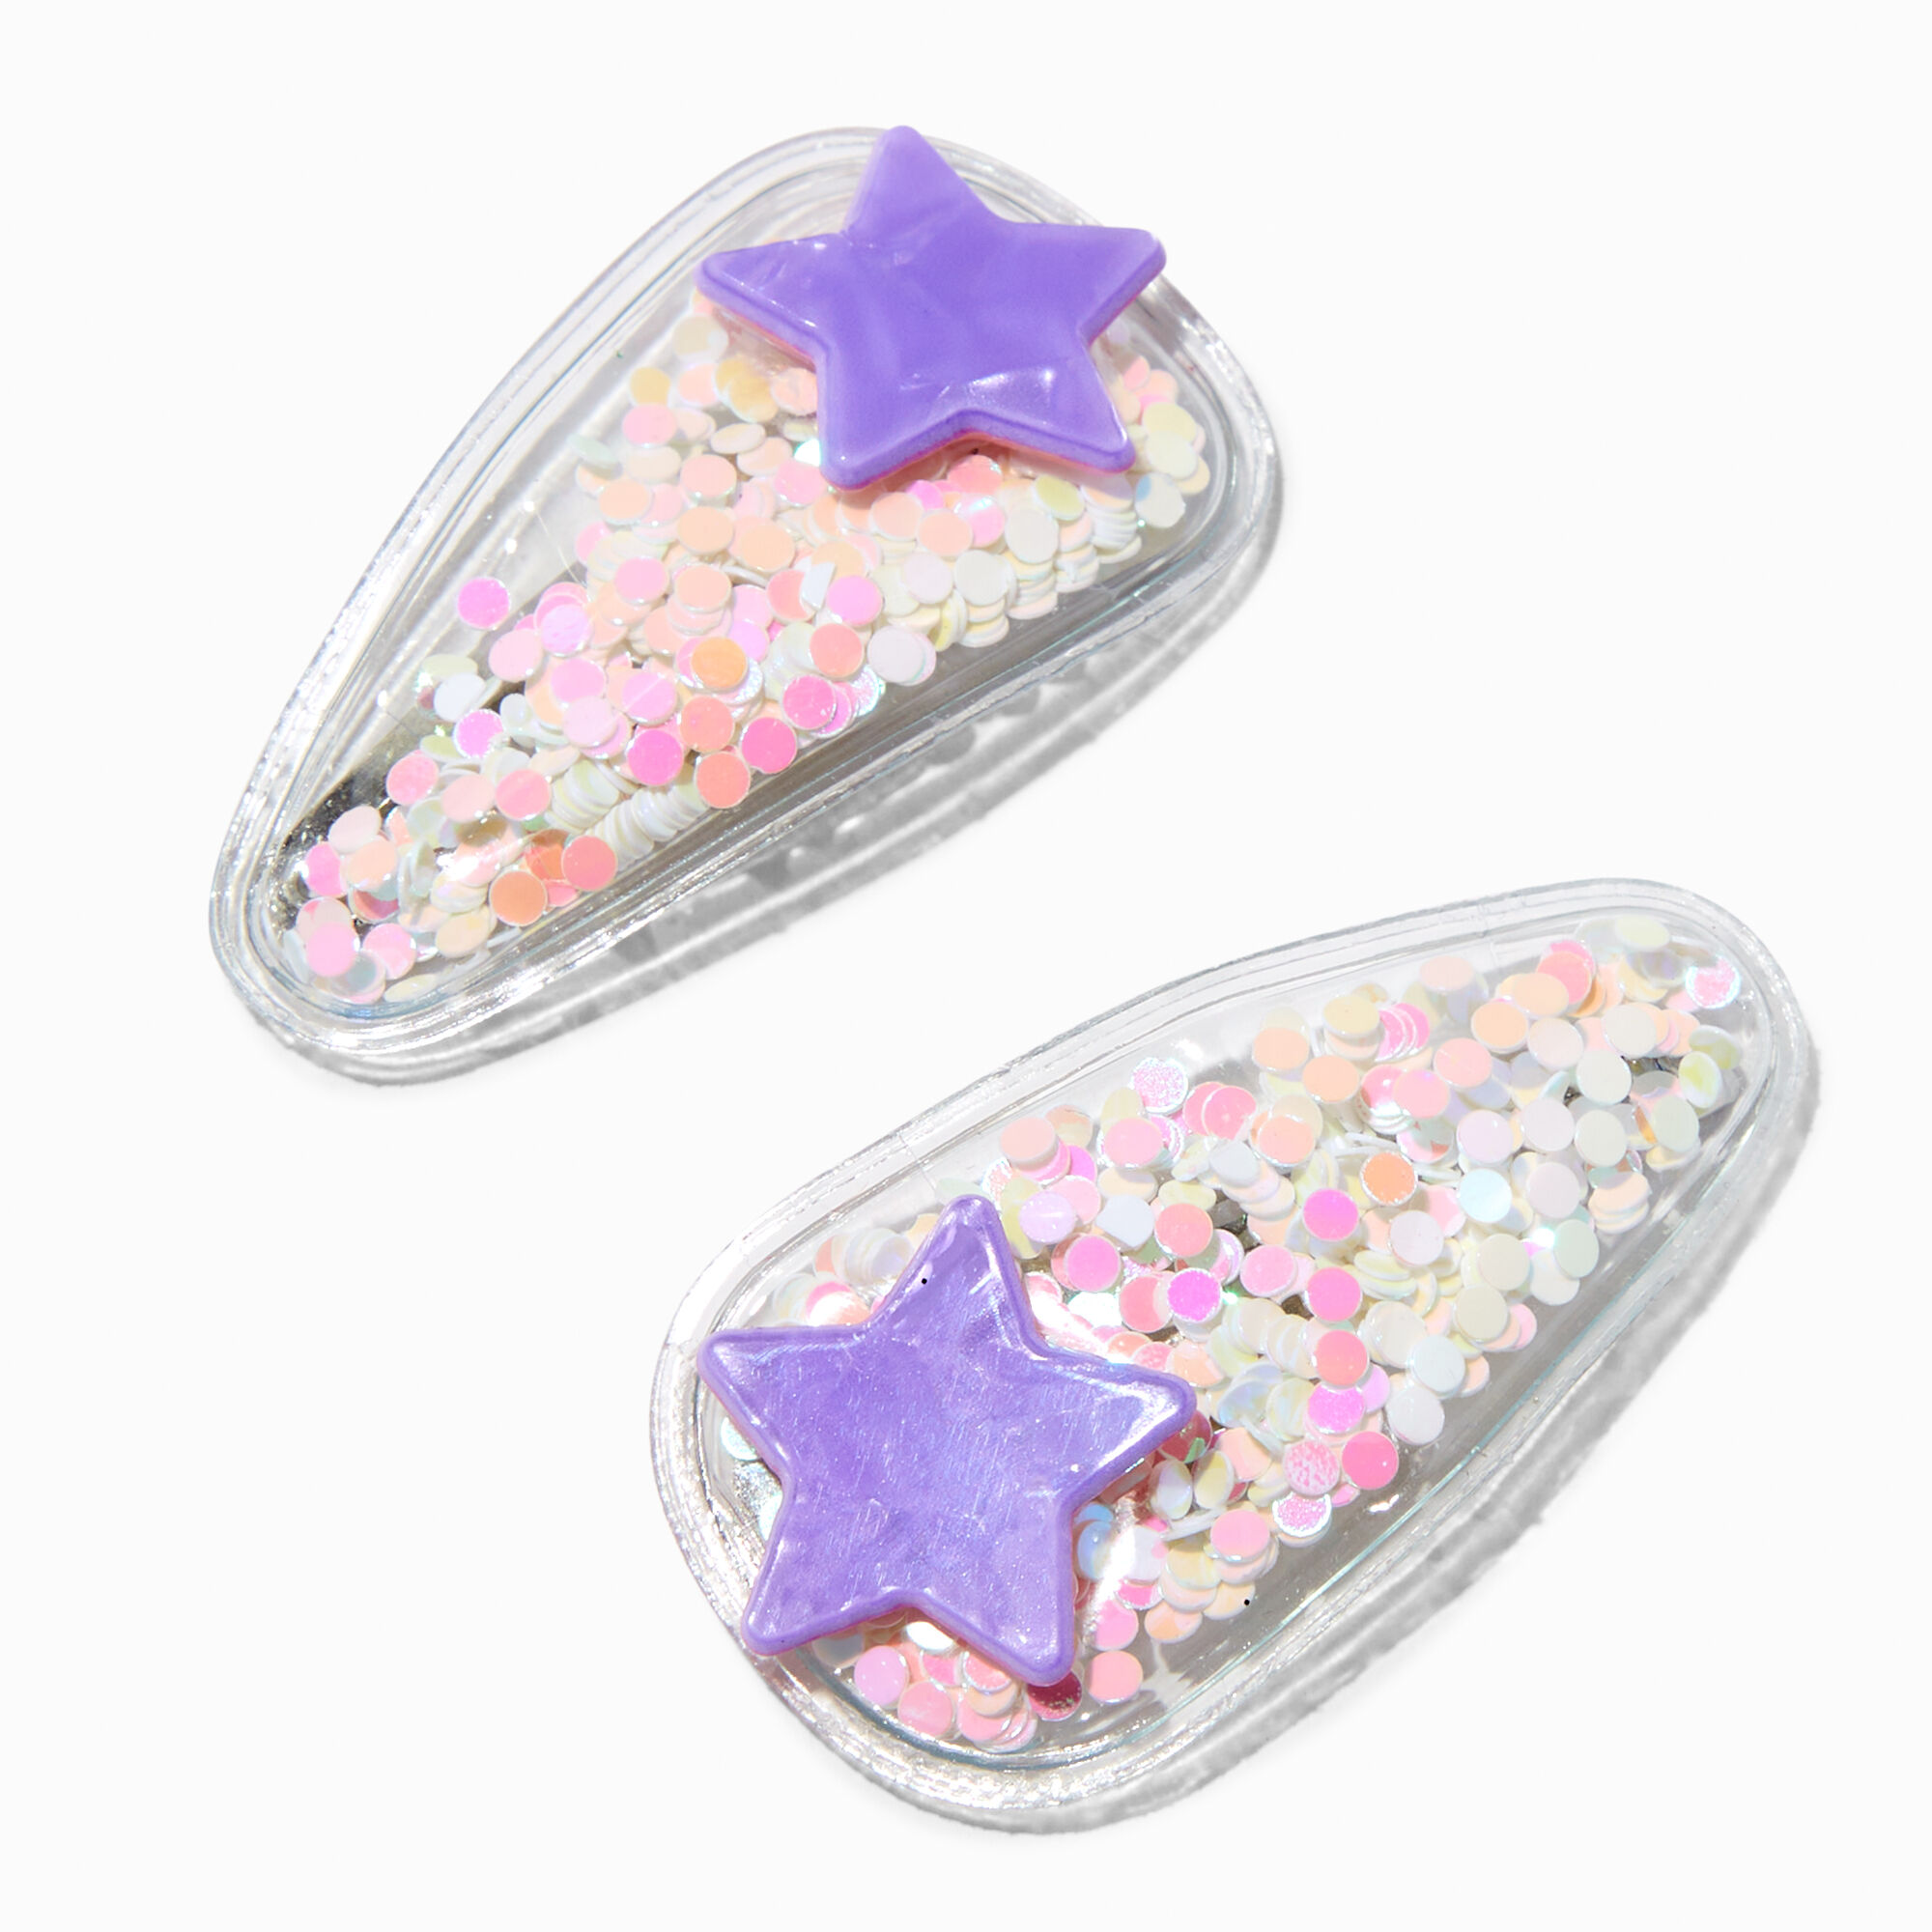 View Claires Club Star Shaker Snap Hair Clips 2 Pack information